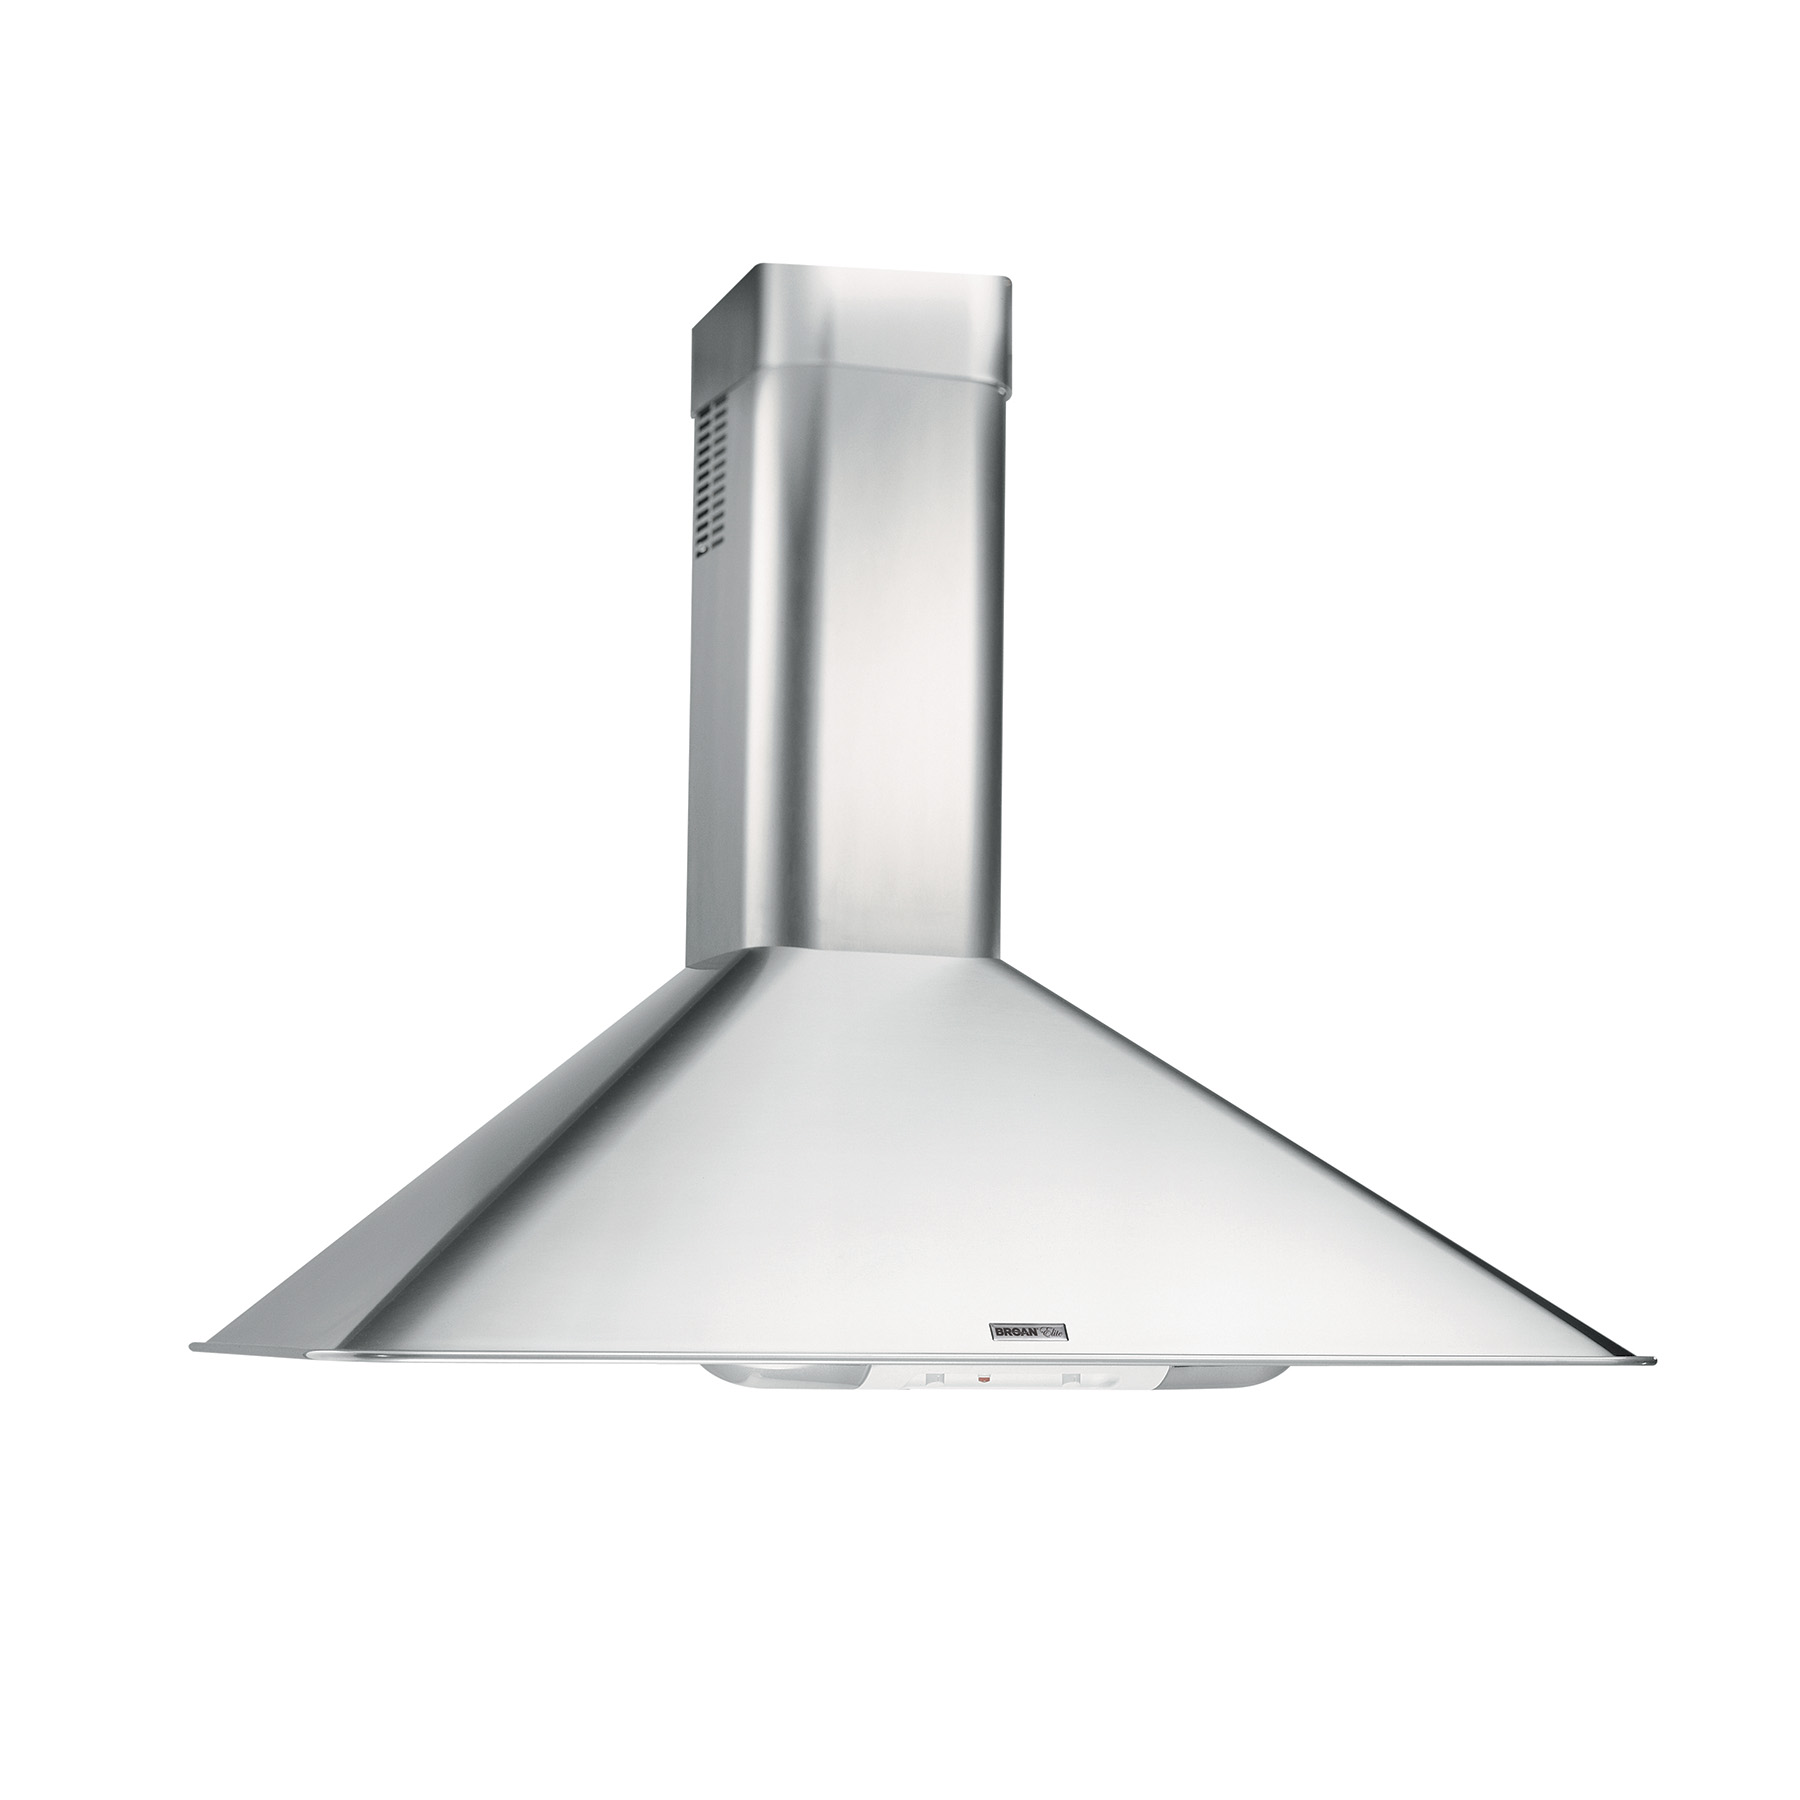 DISCONTINUED-Broan® 30-Inch Convertible Wall-Mount Chimney Range Hood w/ Heat Sentry™, 290 CFM, Stainless Steel